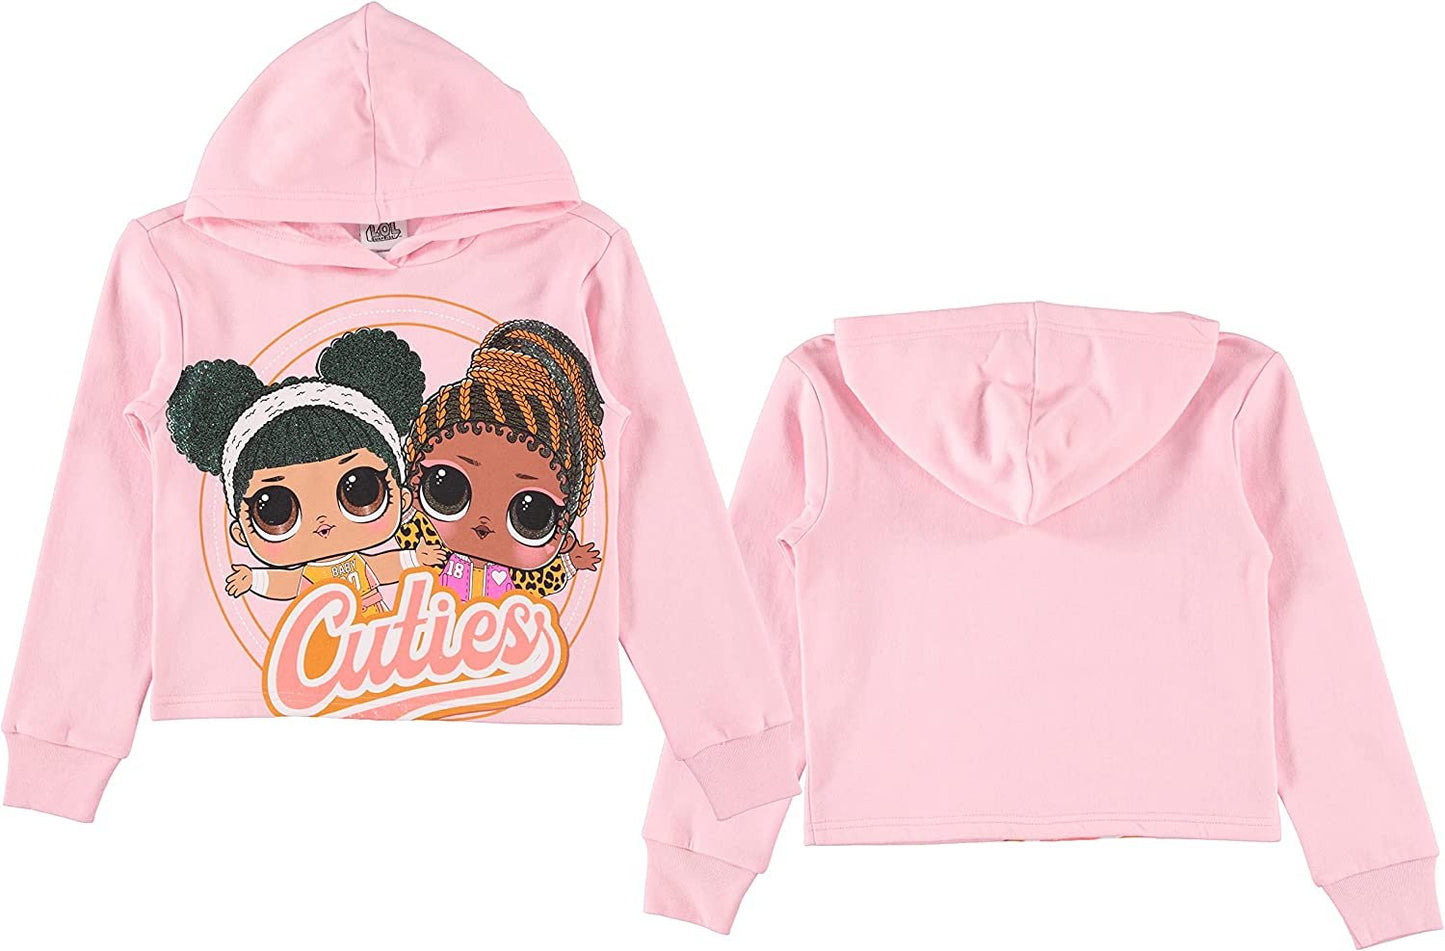 L.O.L. Surprise! Girls All Over Print Hoodie- Raw Edge Skimmer Hoodie Sizes 4-20